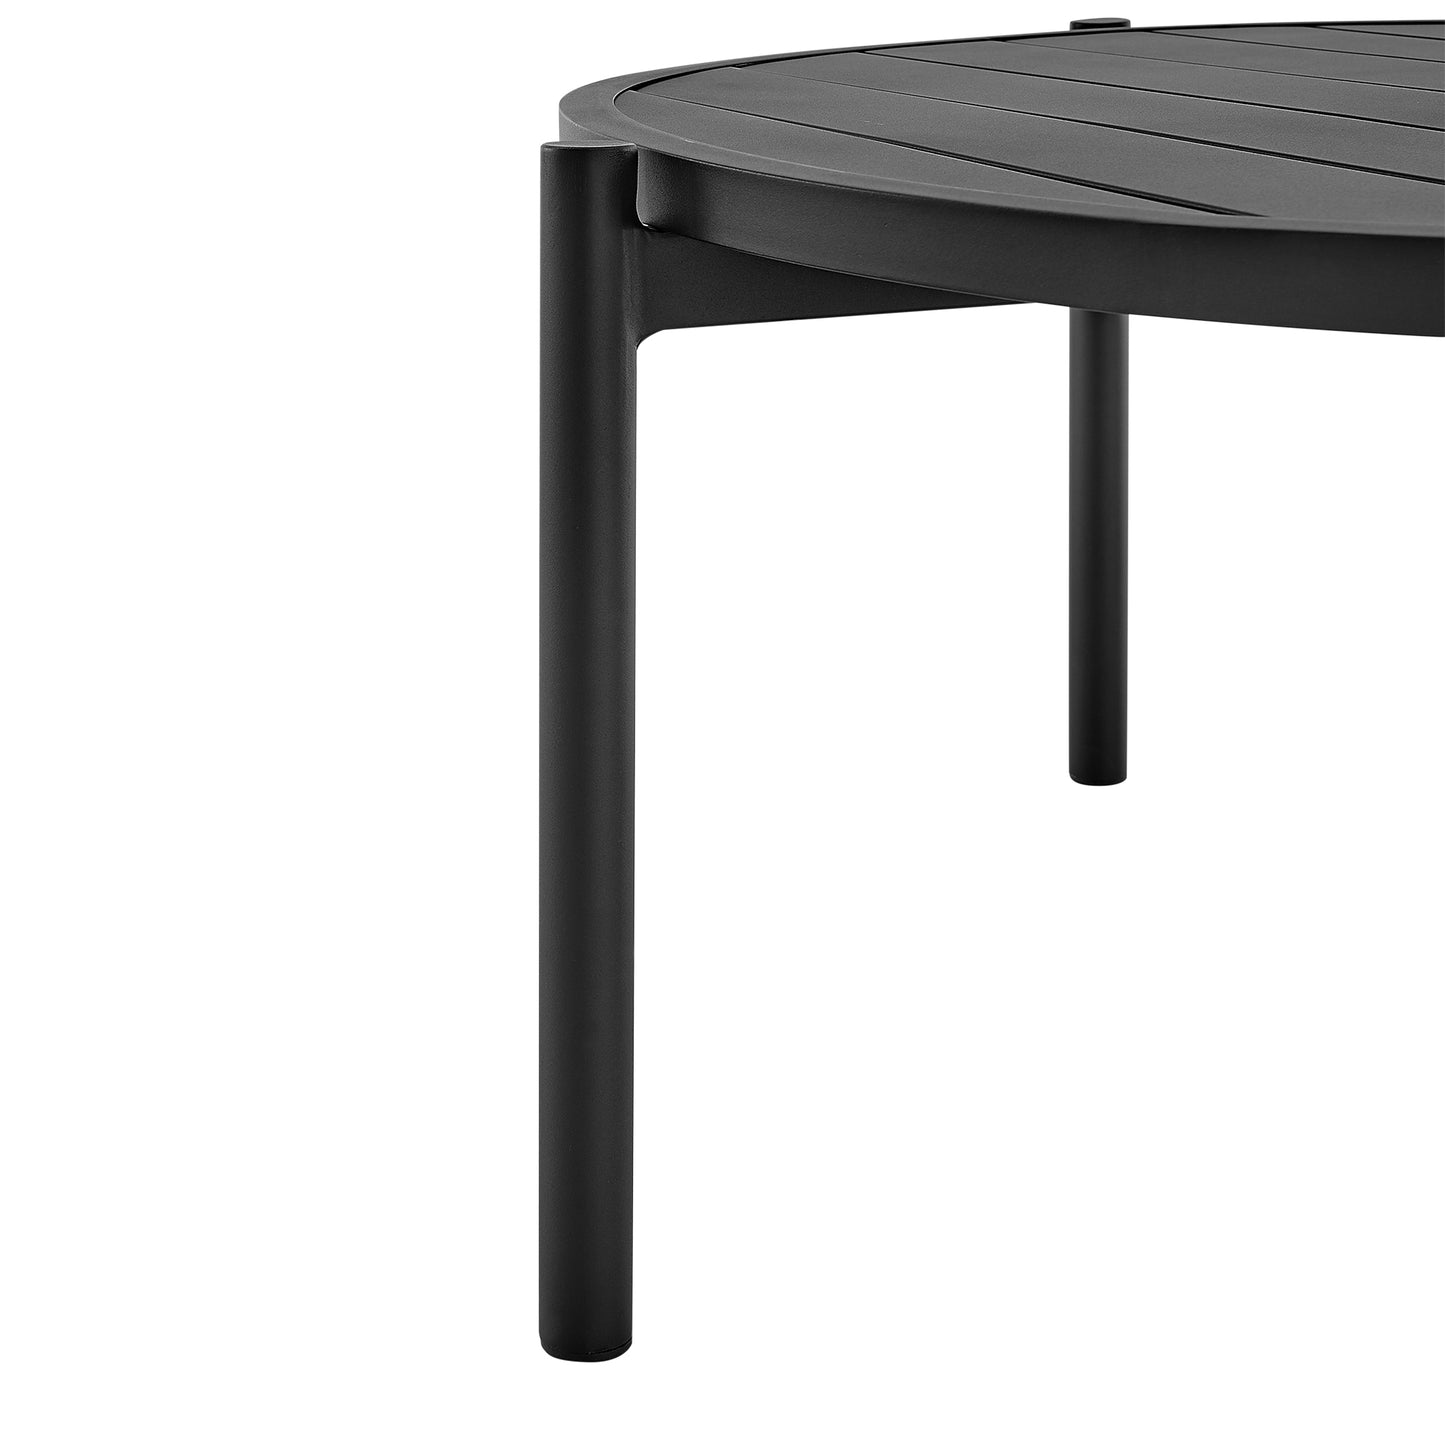 Tiffany Outdoor Patio Round Coffee Table in Black Aluminum